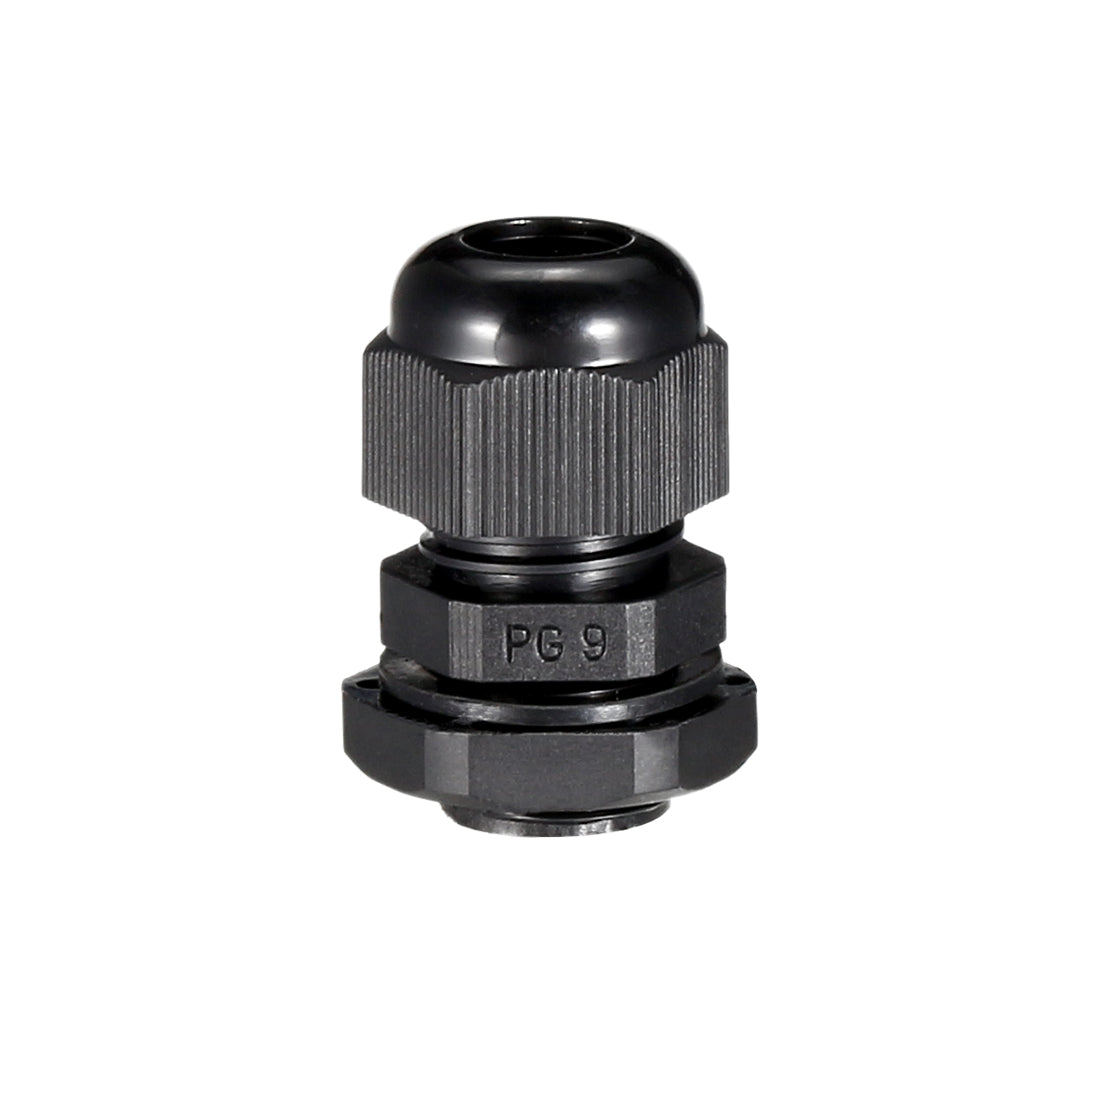 uxcell Uxcell PG9 Cable Gland Waterproof Plastic Joint Adjustable Locknut Black for 4mm-8mm Dia Cable Wire